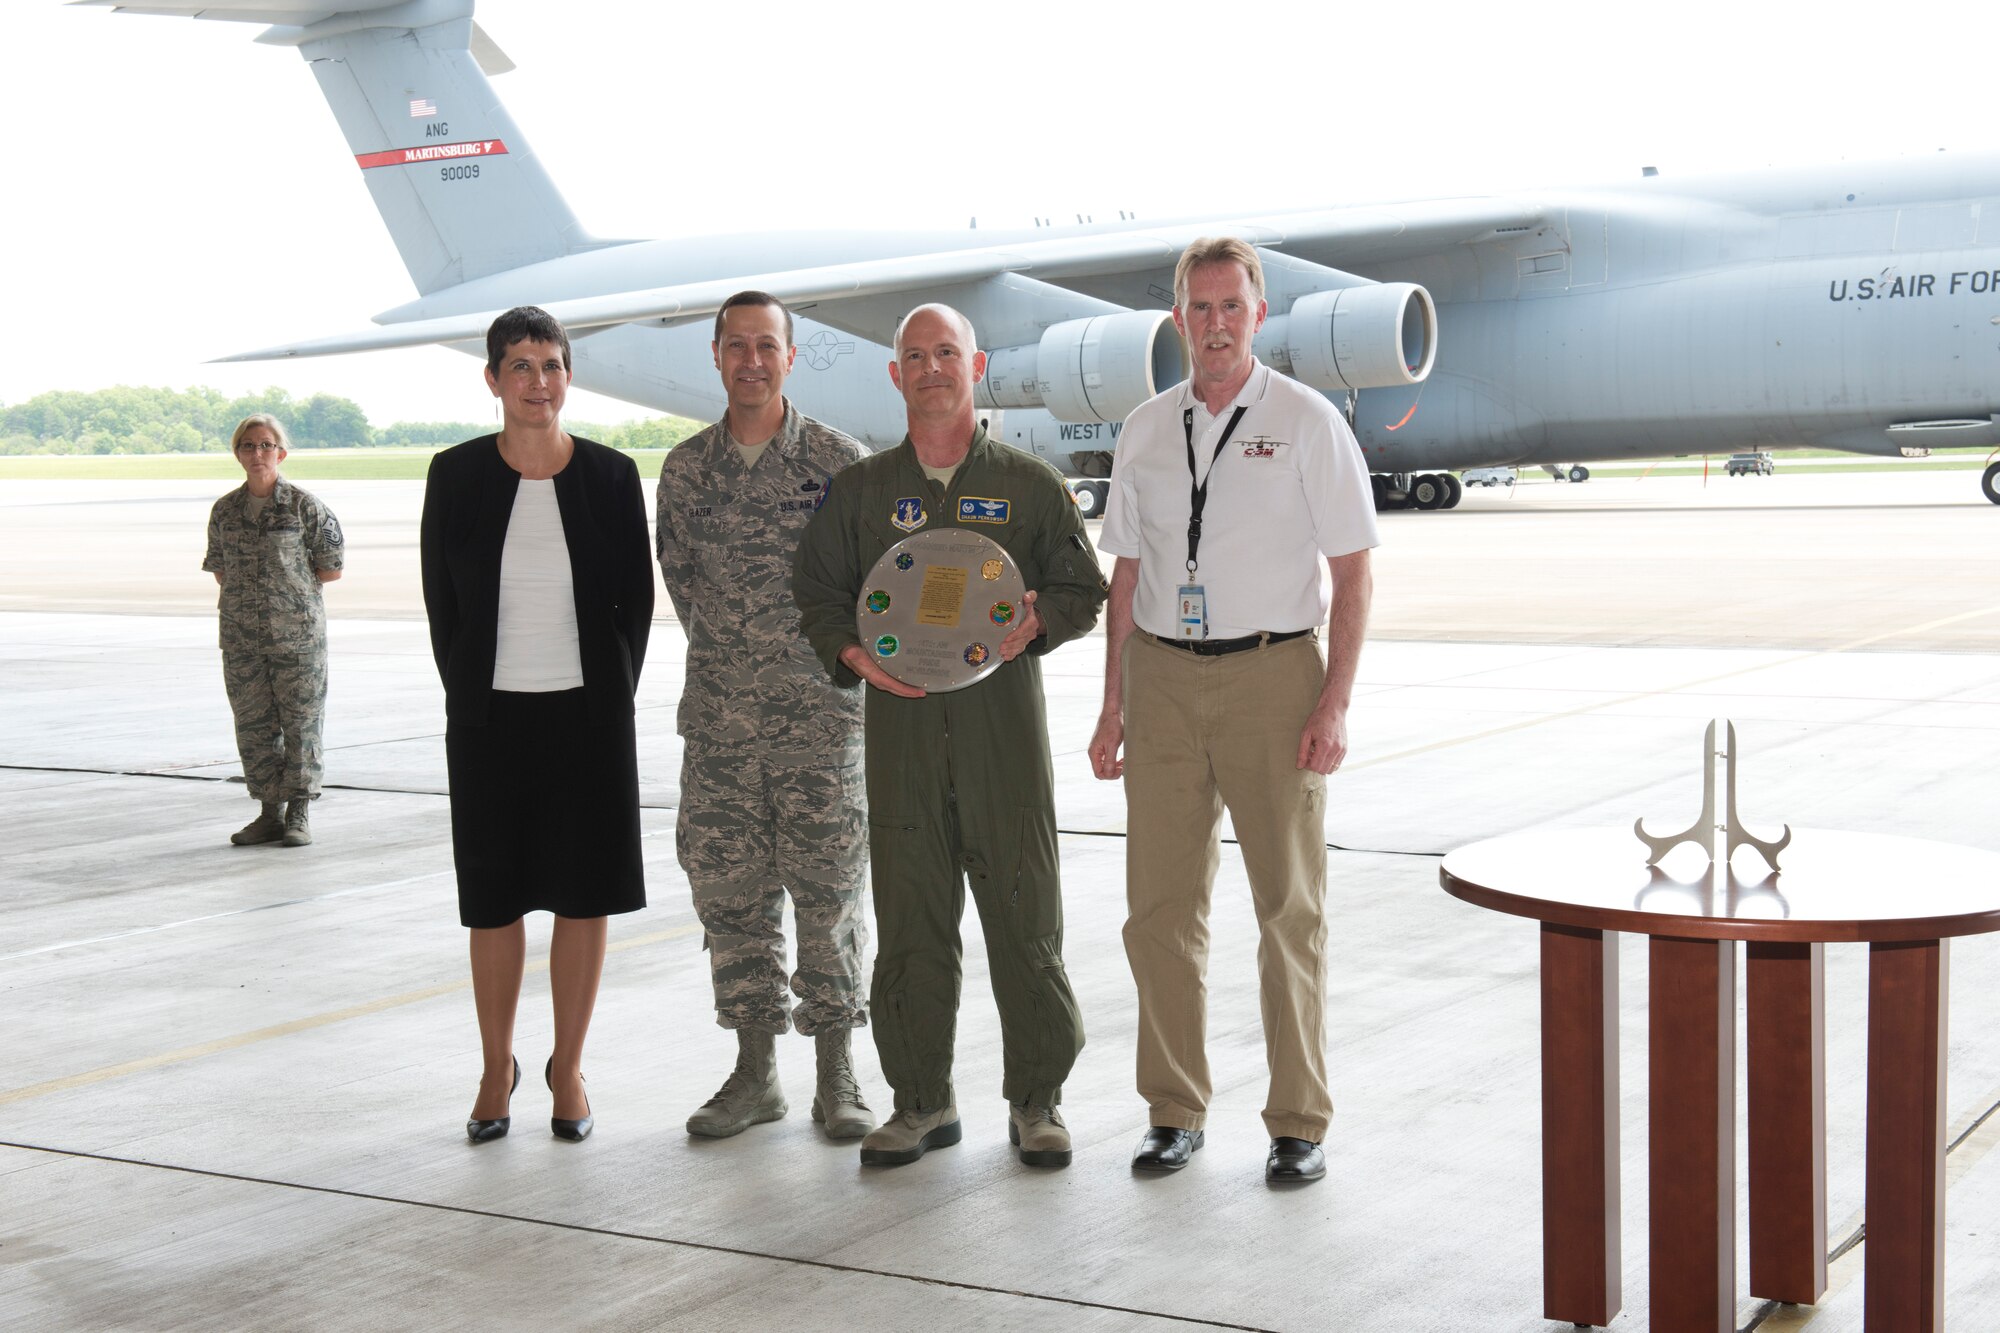 Col. Shaun Perkowski, second from right, 167th Airlift Wing commander, and Chief Master Sgt. Ron Glazer, 167th Airlift Wing command chief, accepted a plaque from Lockheed Martin representatives, Kim Mazur, left, program director for Lockheed Martin, and Chuck LaFavre, Lockheed Martin Martinsburg C-5 systems engineer during a ceremony marking the end of a 52 year partnership between the 167th Airlift Wing and Lockheed Martin at the Martinsburg, W.Va. unit, May 19. The wing is in conversion from C-5 Galaxy aircraft to C-17 Globemaster III aircraft. The last C-5 assigned to wing departed May 20 for the 309th Aerospace Maintenance and Regeneration Group at Davis-Monthan Air Force Base. (photo by Master Sgt. Emily Beightol-Deyerle/released)